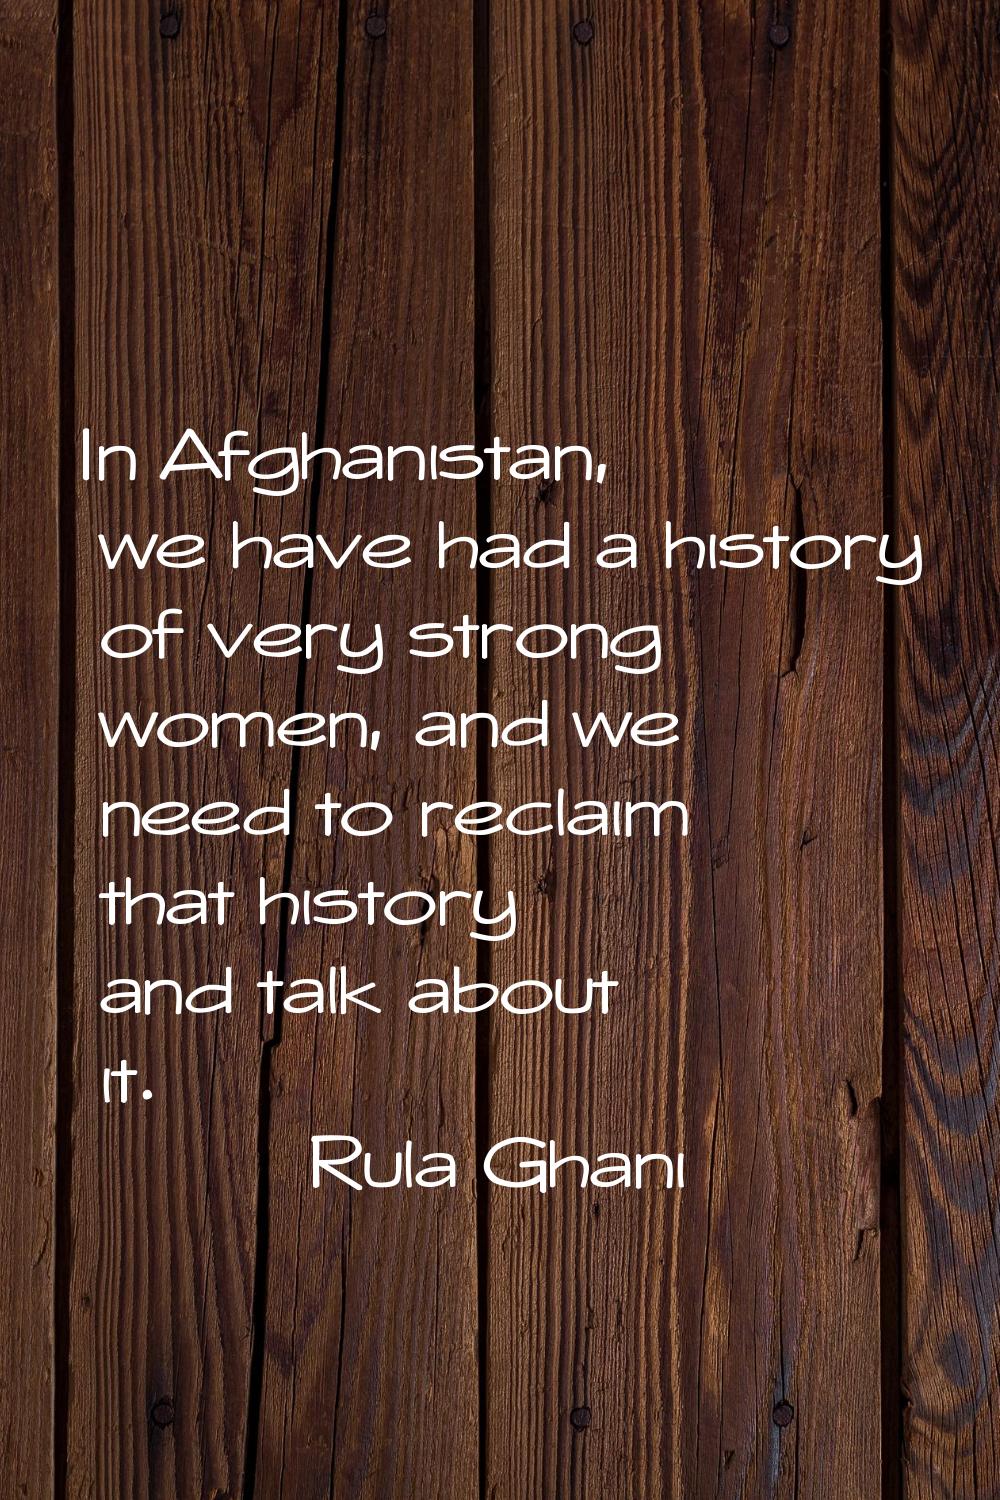 In Afghanistan, we have had a history of very strong women, and we need to reclaim that history and